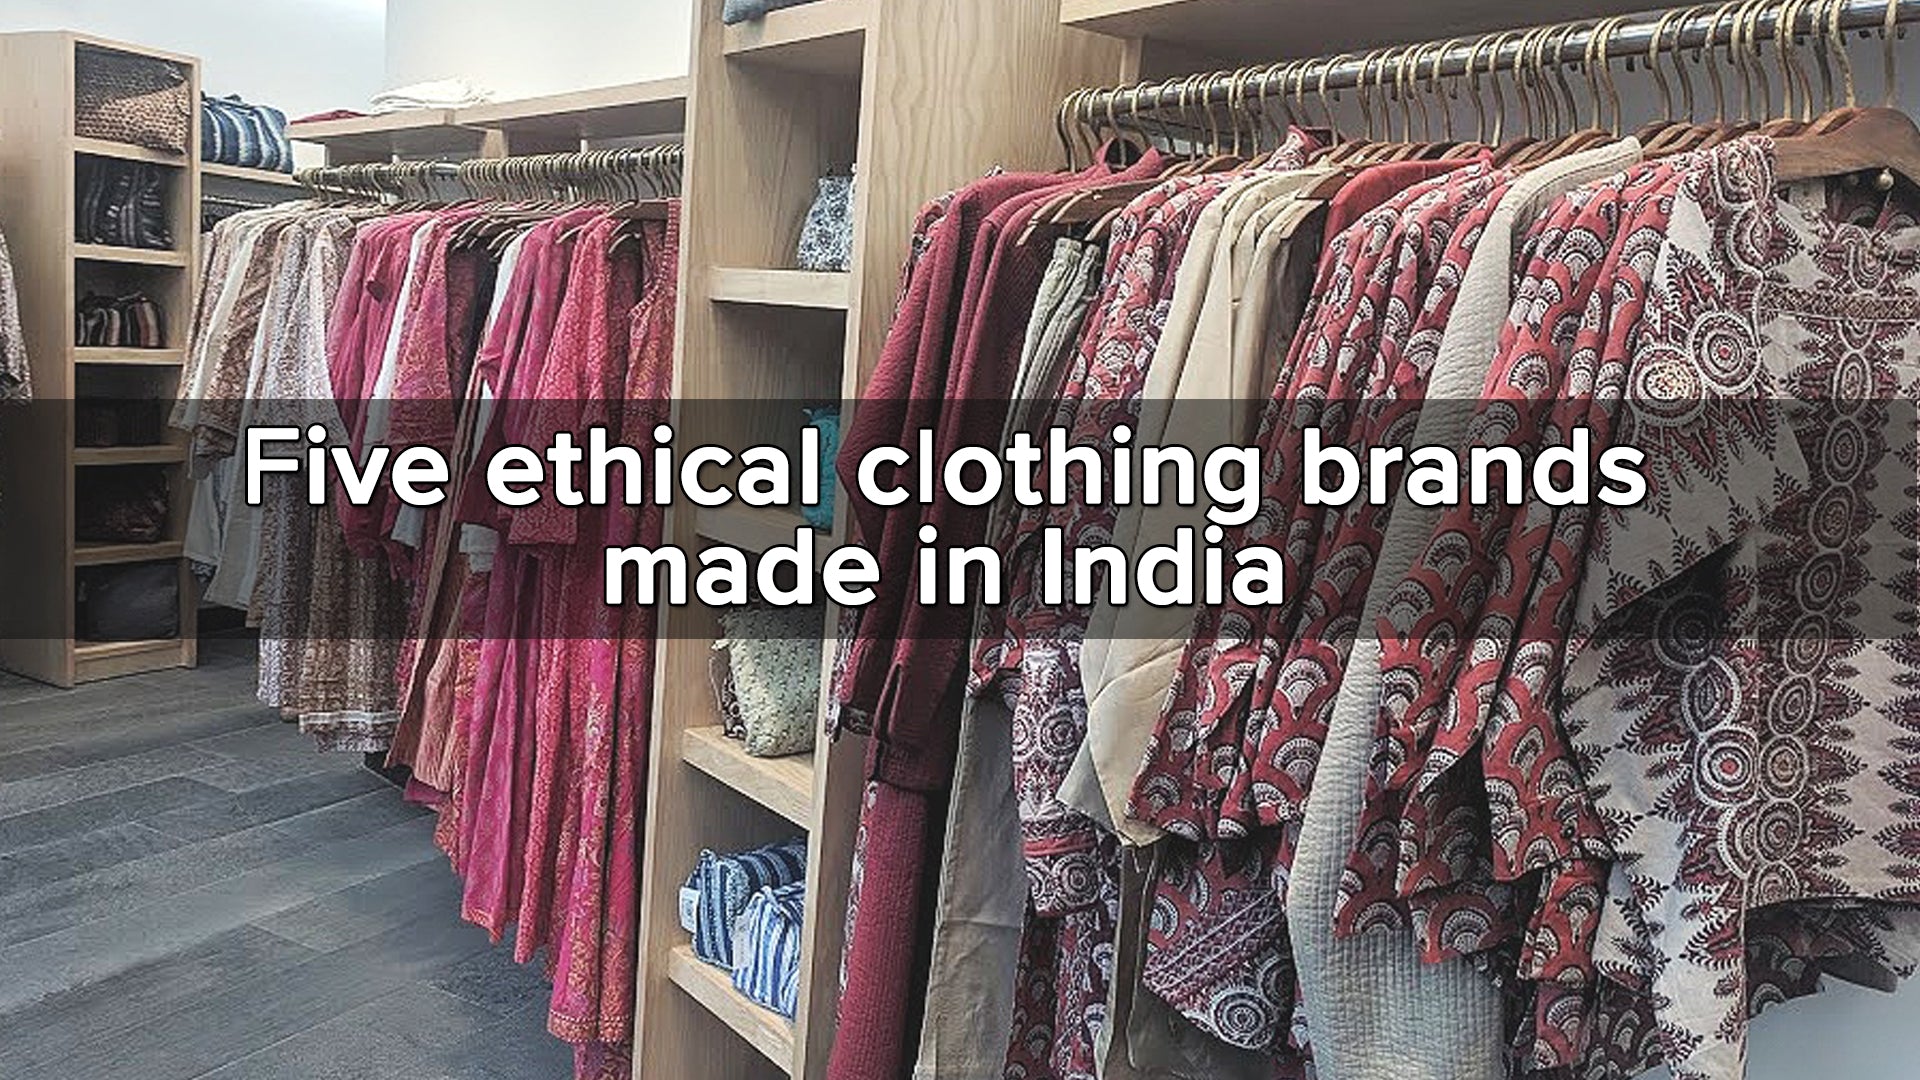 Five ethical clothing brands made in India